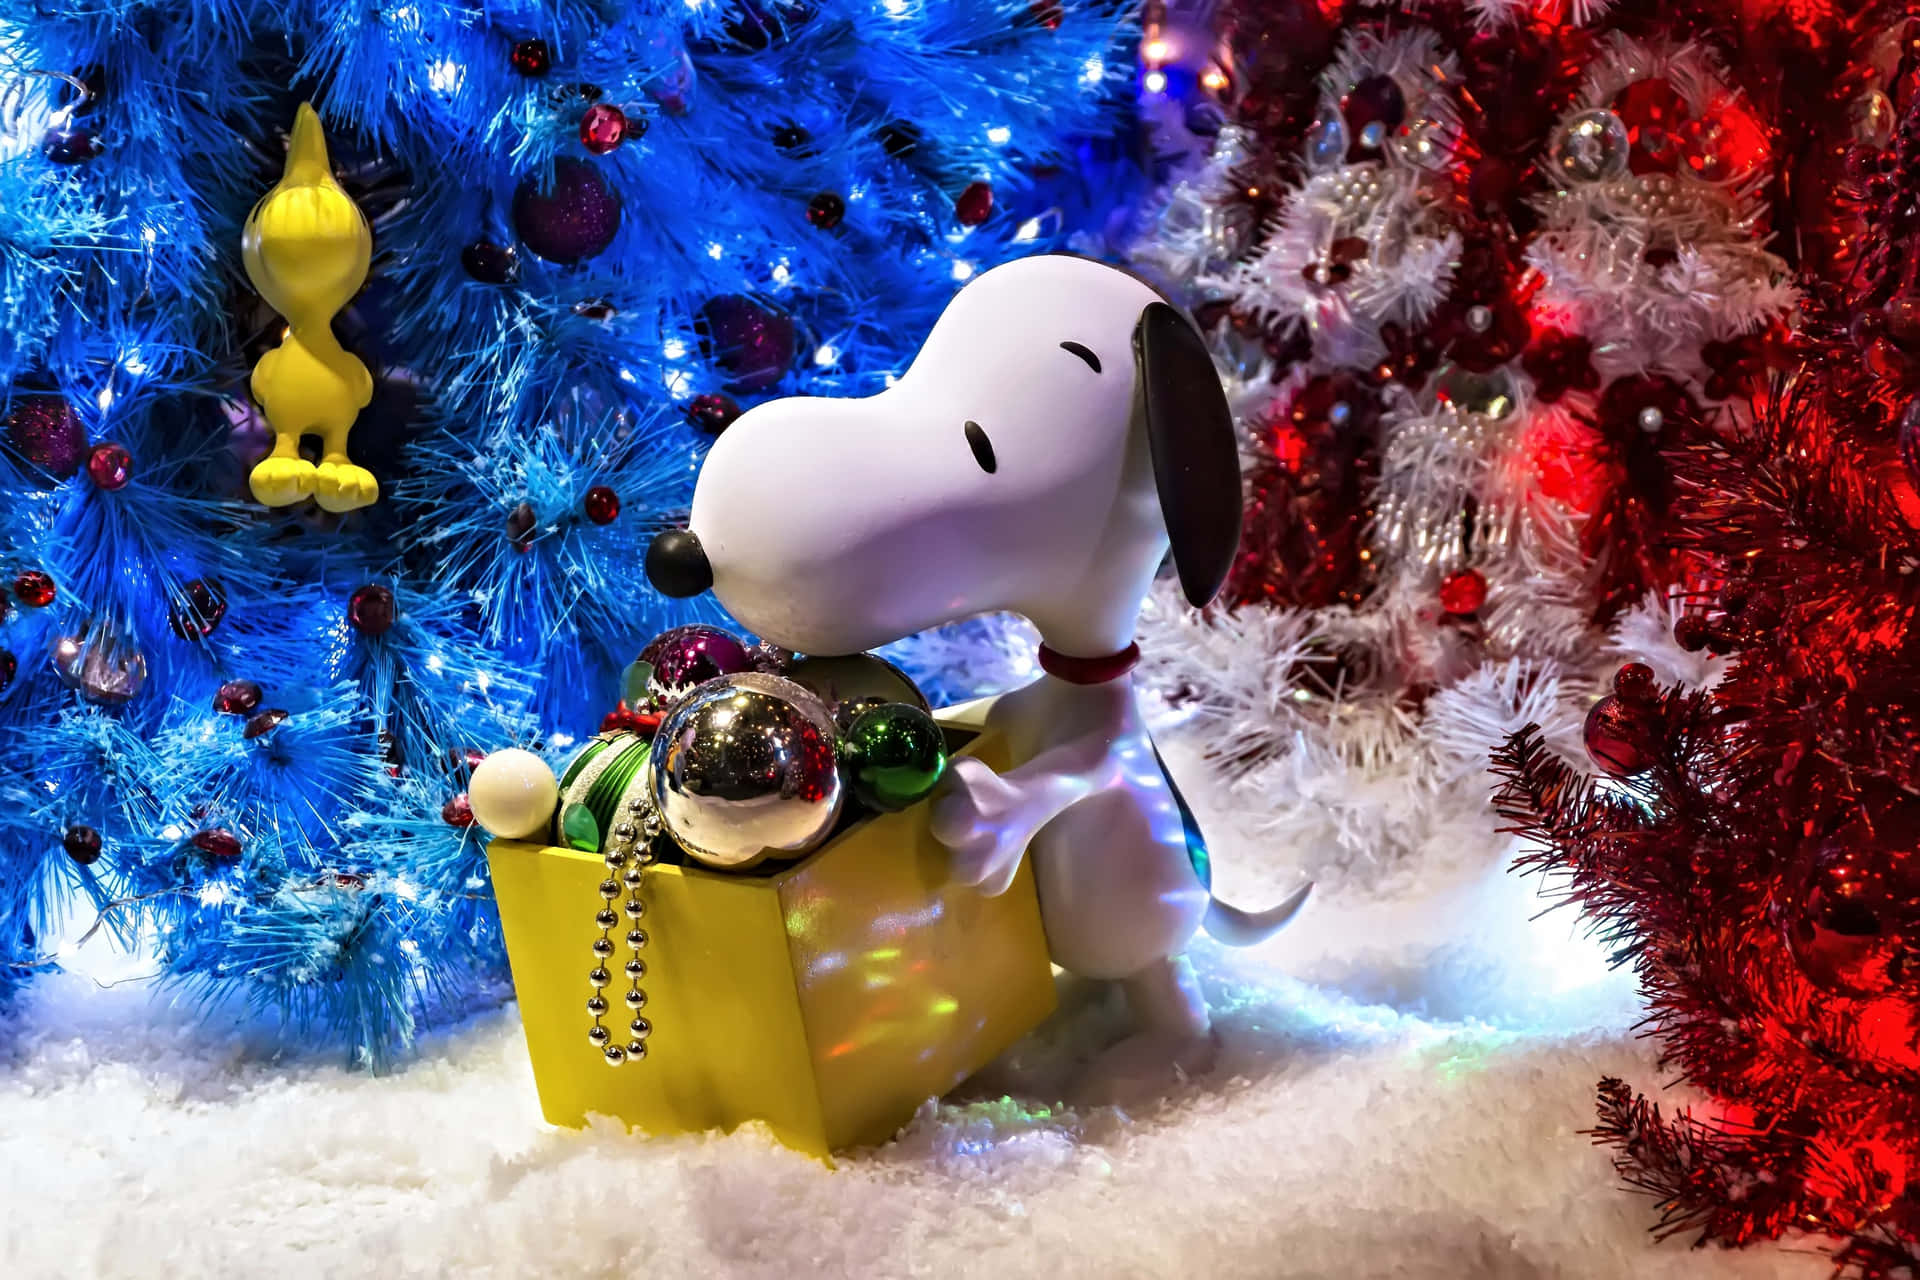 Celebrate Christmas with your family and the Peanuts Gang! Wallpaper